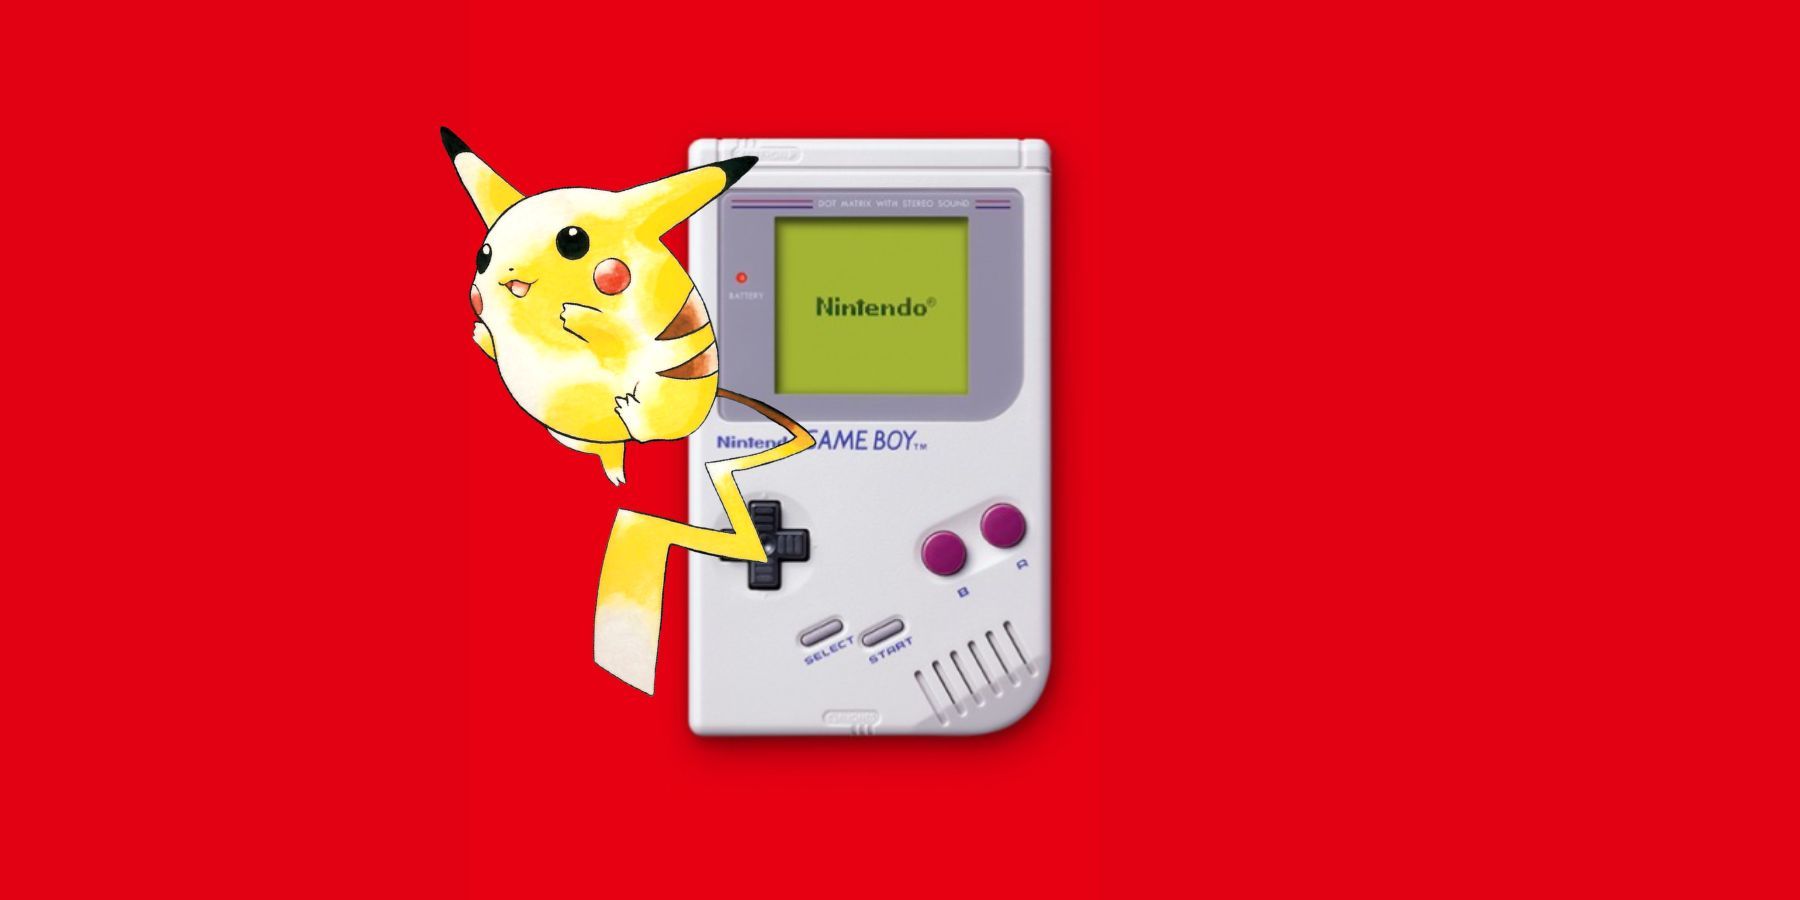 Nintendo Switch Online’s Incoming Game Boy Pokemon Title Should Inspire a Spin-Off Revival